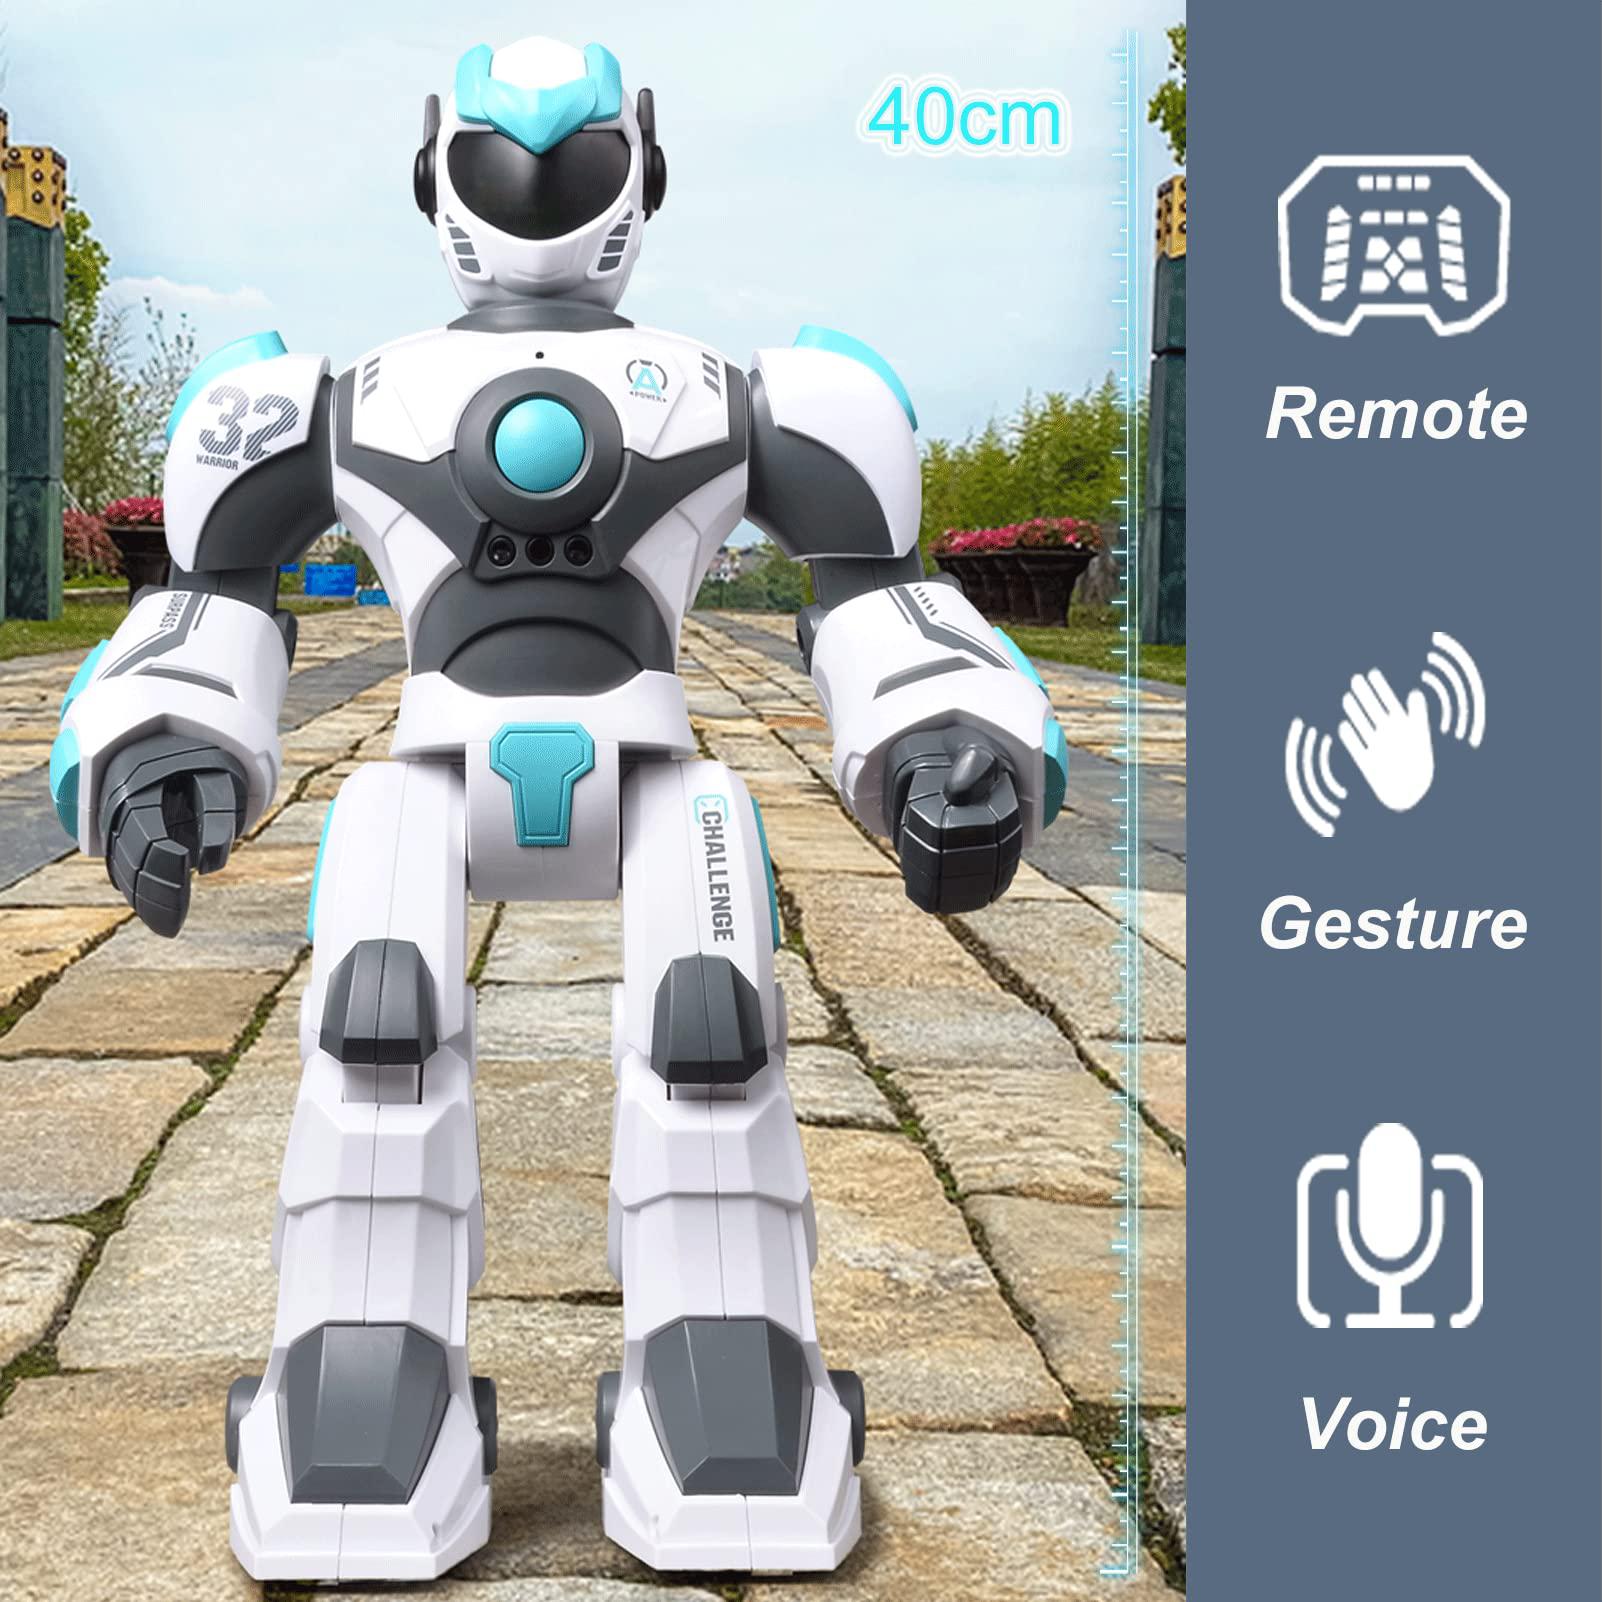 Aikmi large robot toys for kids, giant smart robot toys with voice control, big robot toys for 6 7 8 9 year old boys girls, rc robo